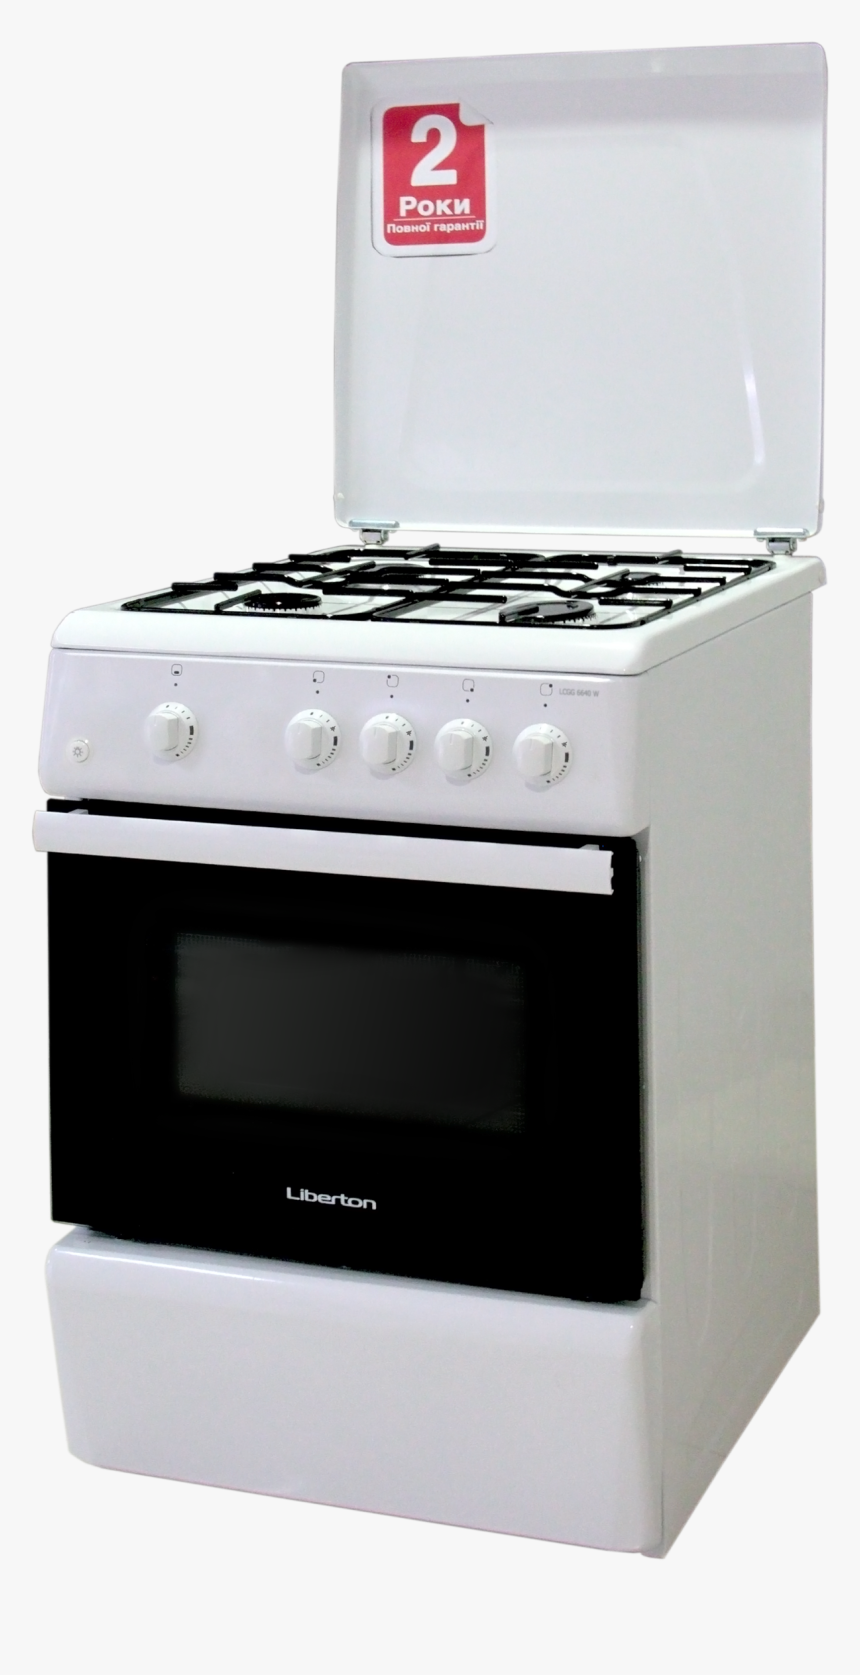 Stove Png - Плита Png, Transparent Png, Free Download